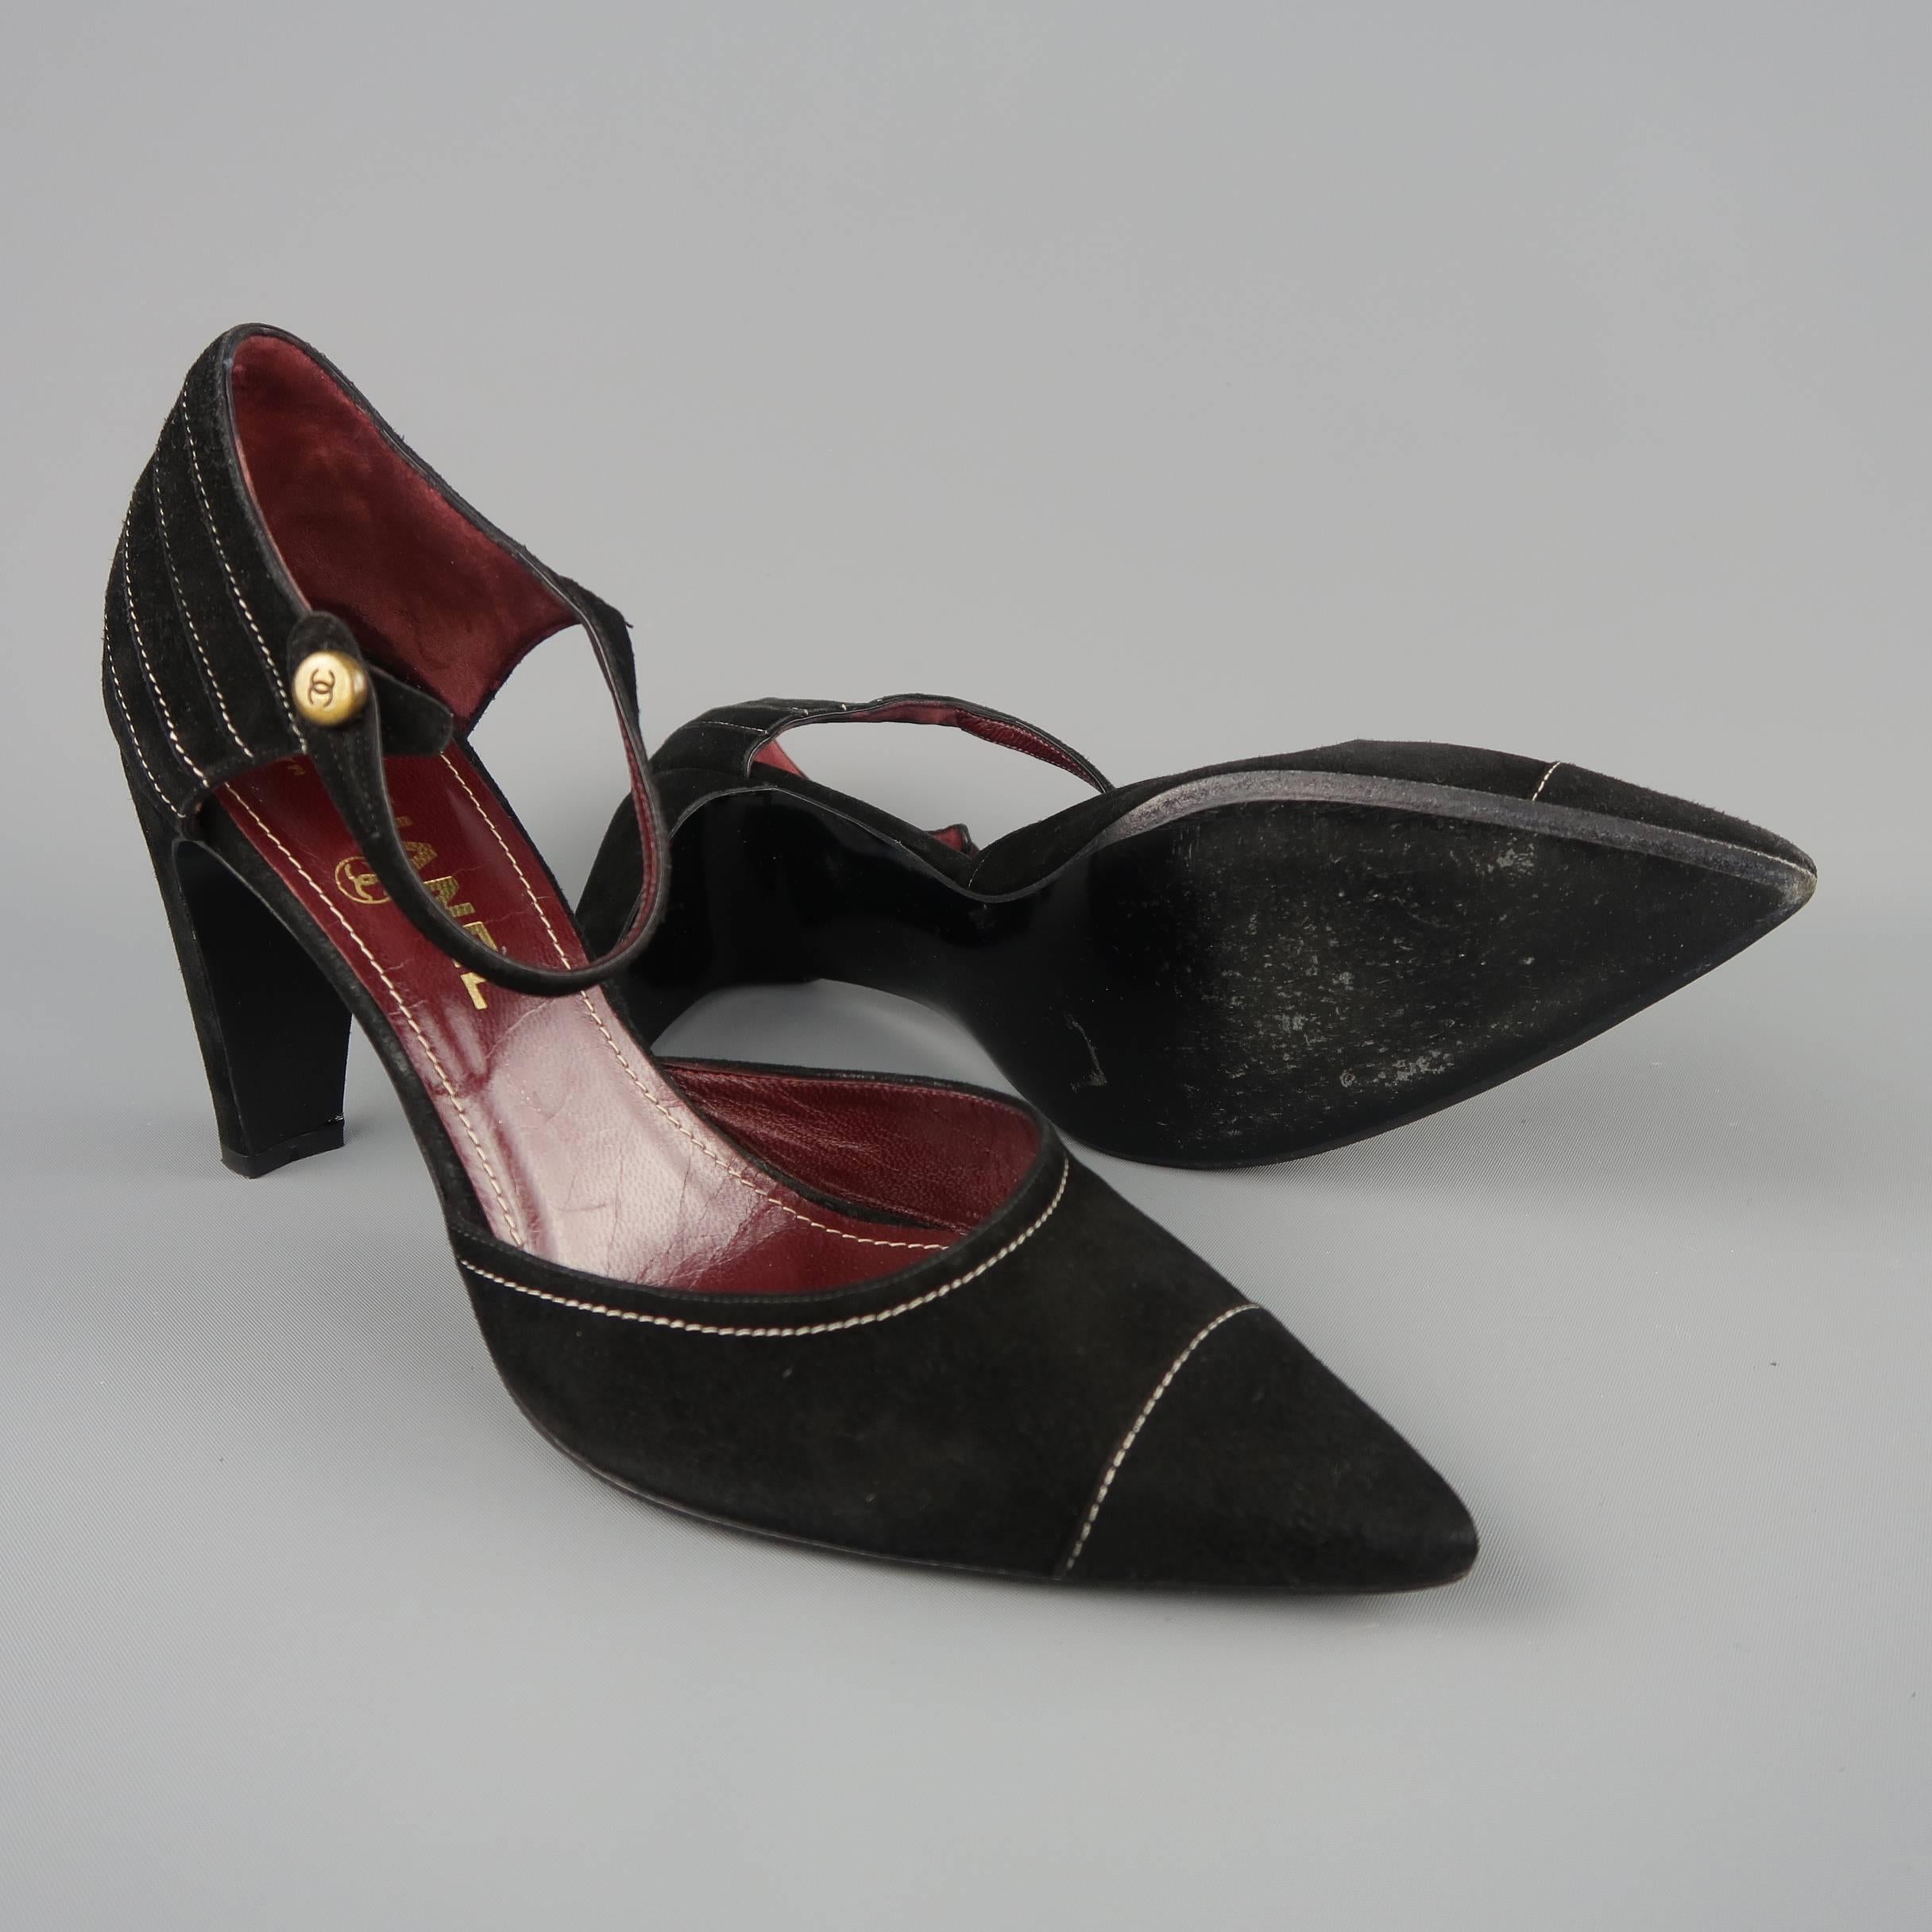 Vintage CHANEL pumps come in black suede with cream contrast stitching details throughout, pointed cap toe, thick covered heel, and ankle strap with antique gold tone CC button.  Made in Italy.
 
Good Pre-Owned Condition.
Marked: IT 39.5
